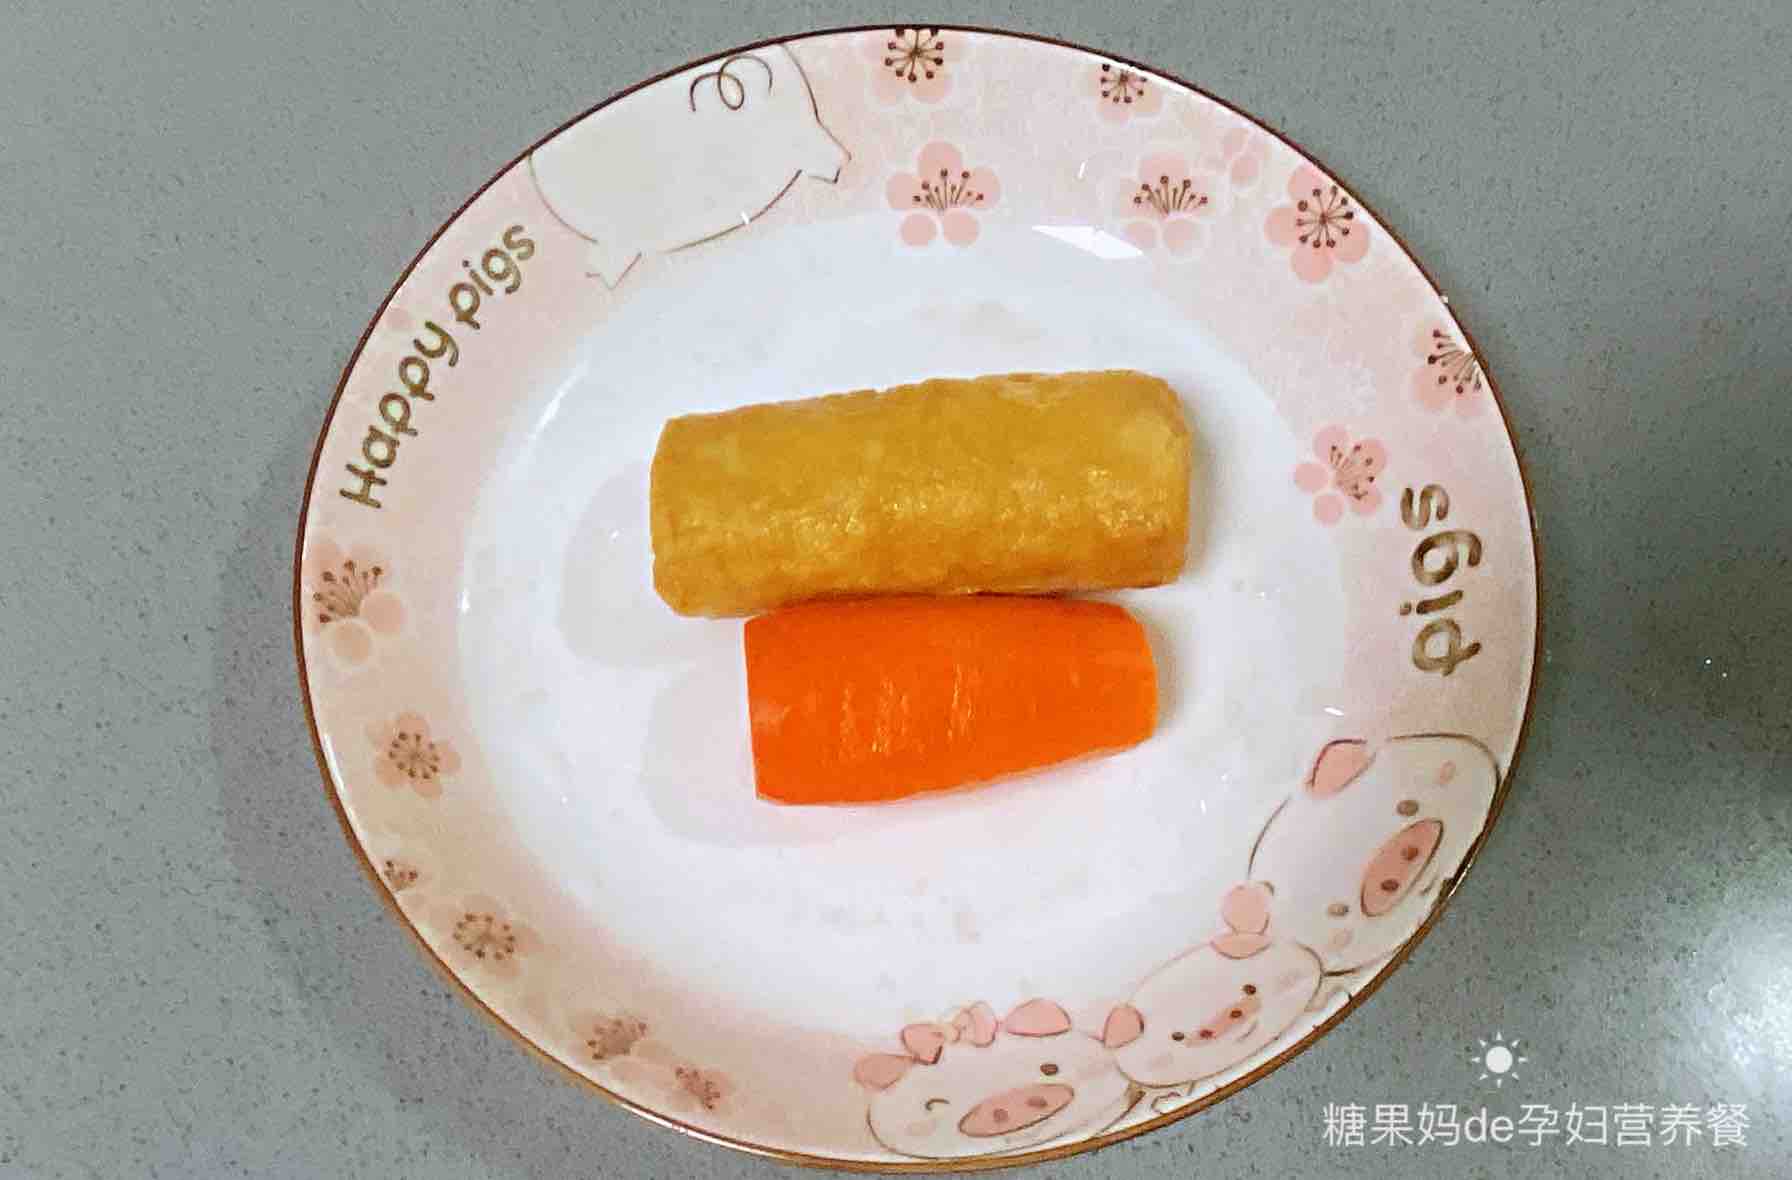 [recipe for Pregnant Women] Fish Cake and Winter Melon Soup, Sweet and Delicious, Umami recipe